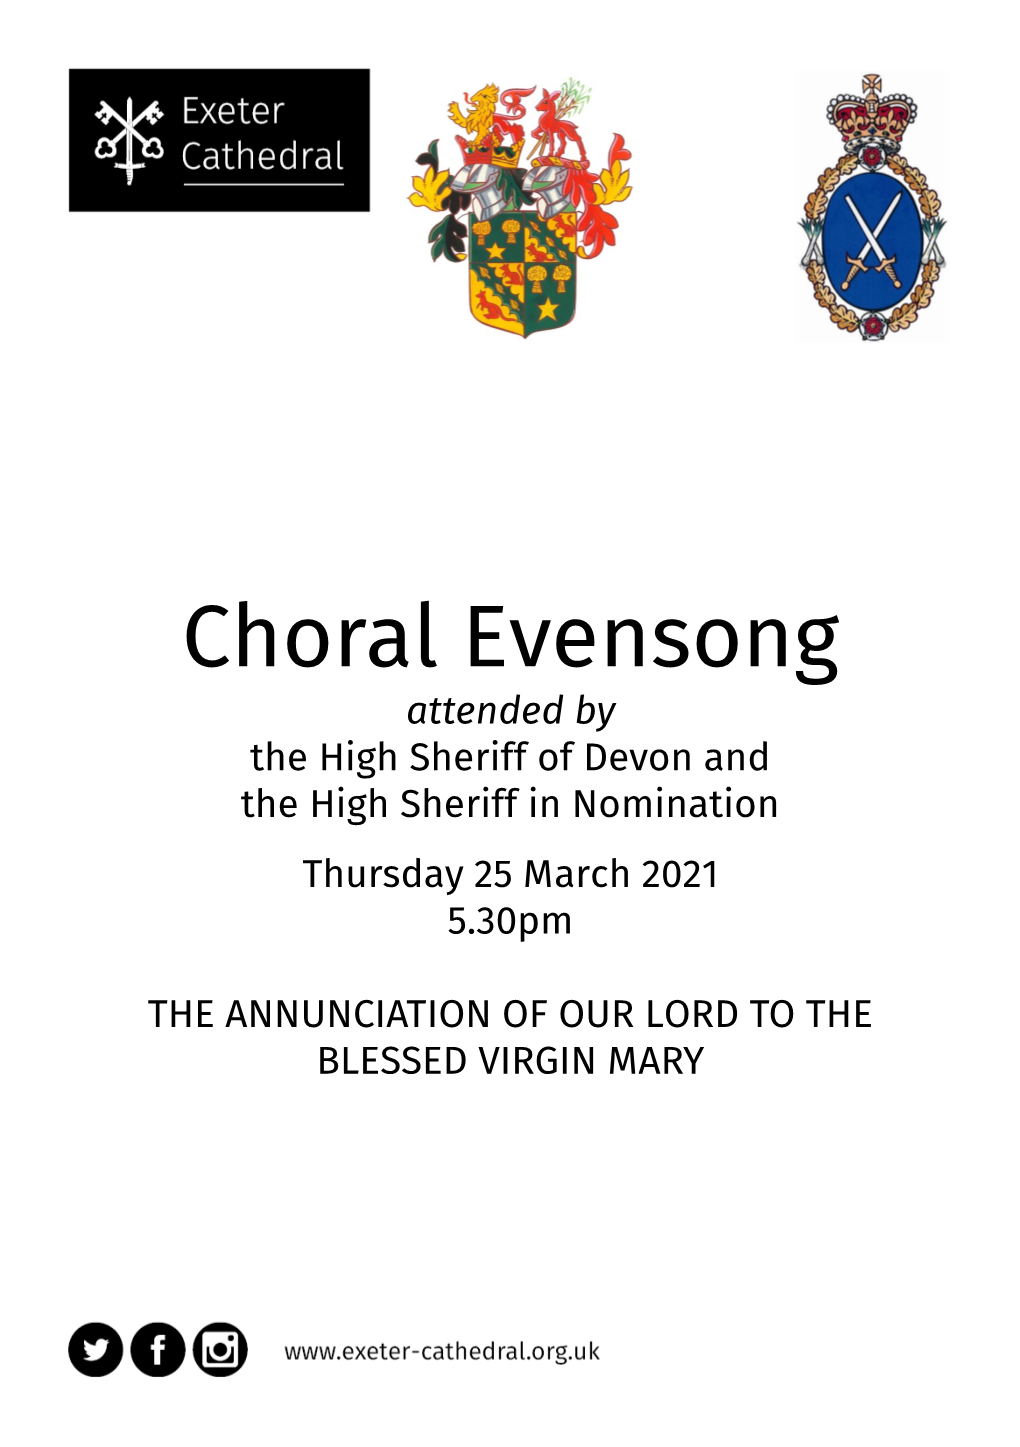 Choral Evensong Attended by the High Sheriff of Devon and the High Sheriff in Nomination